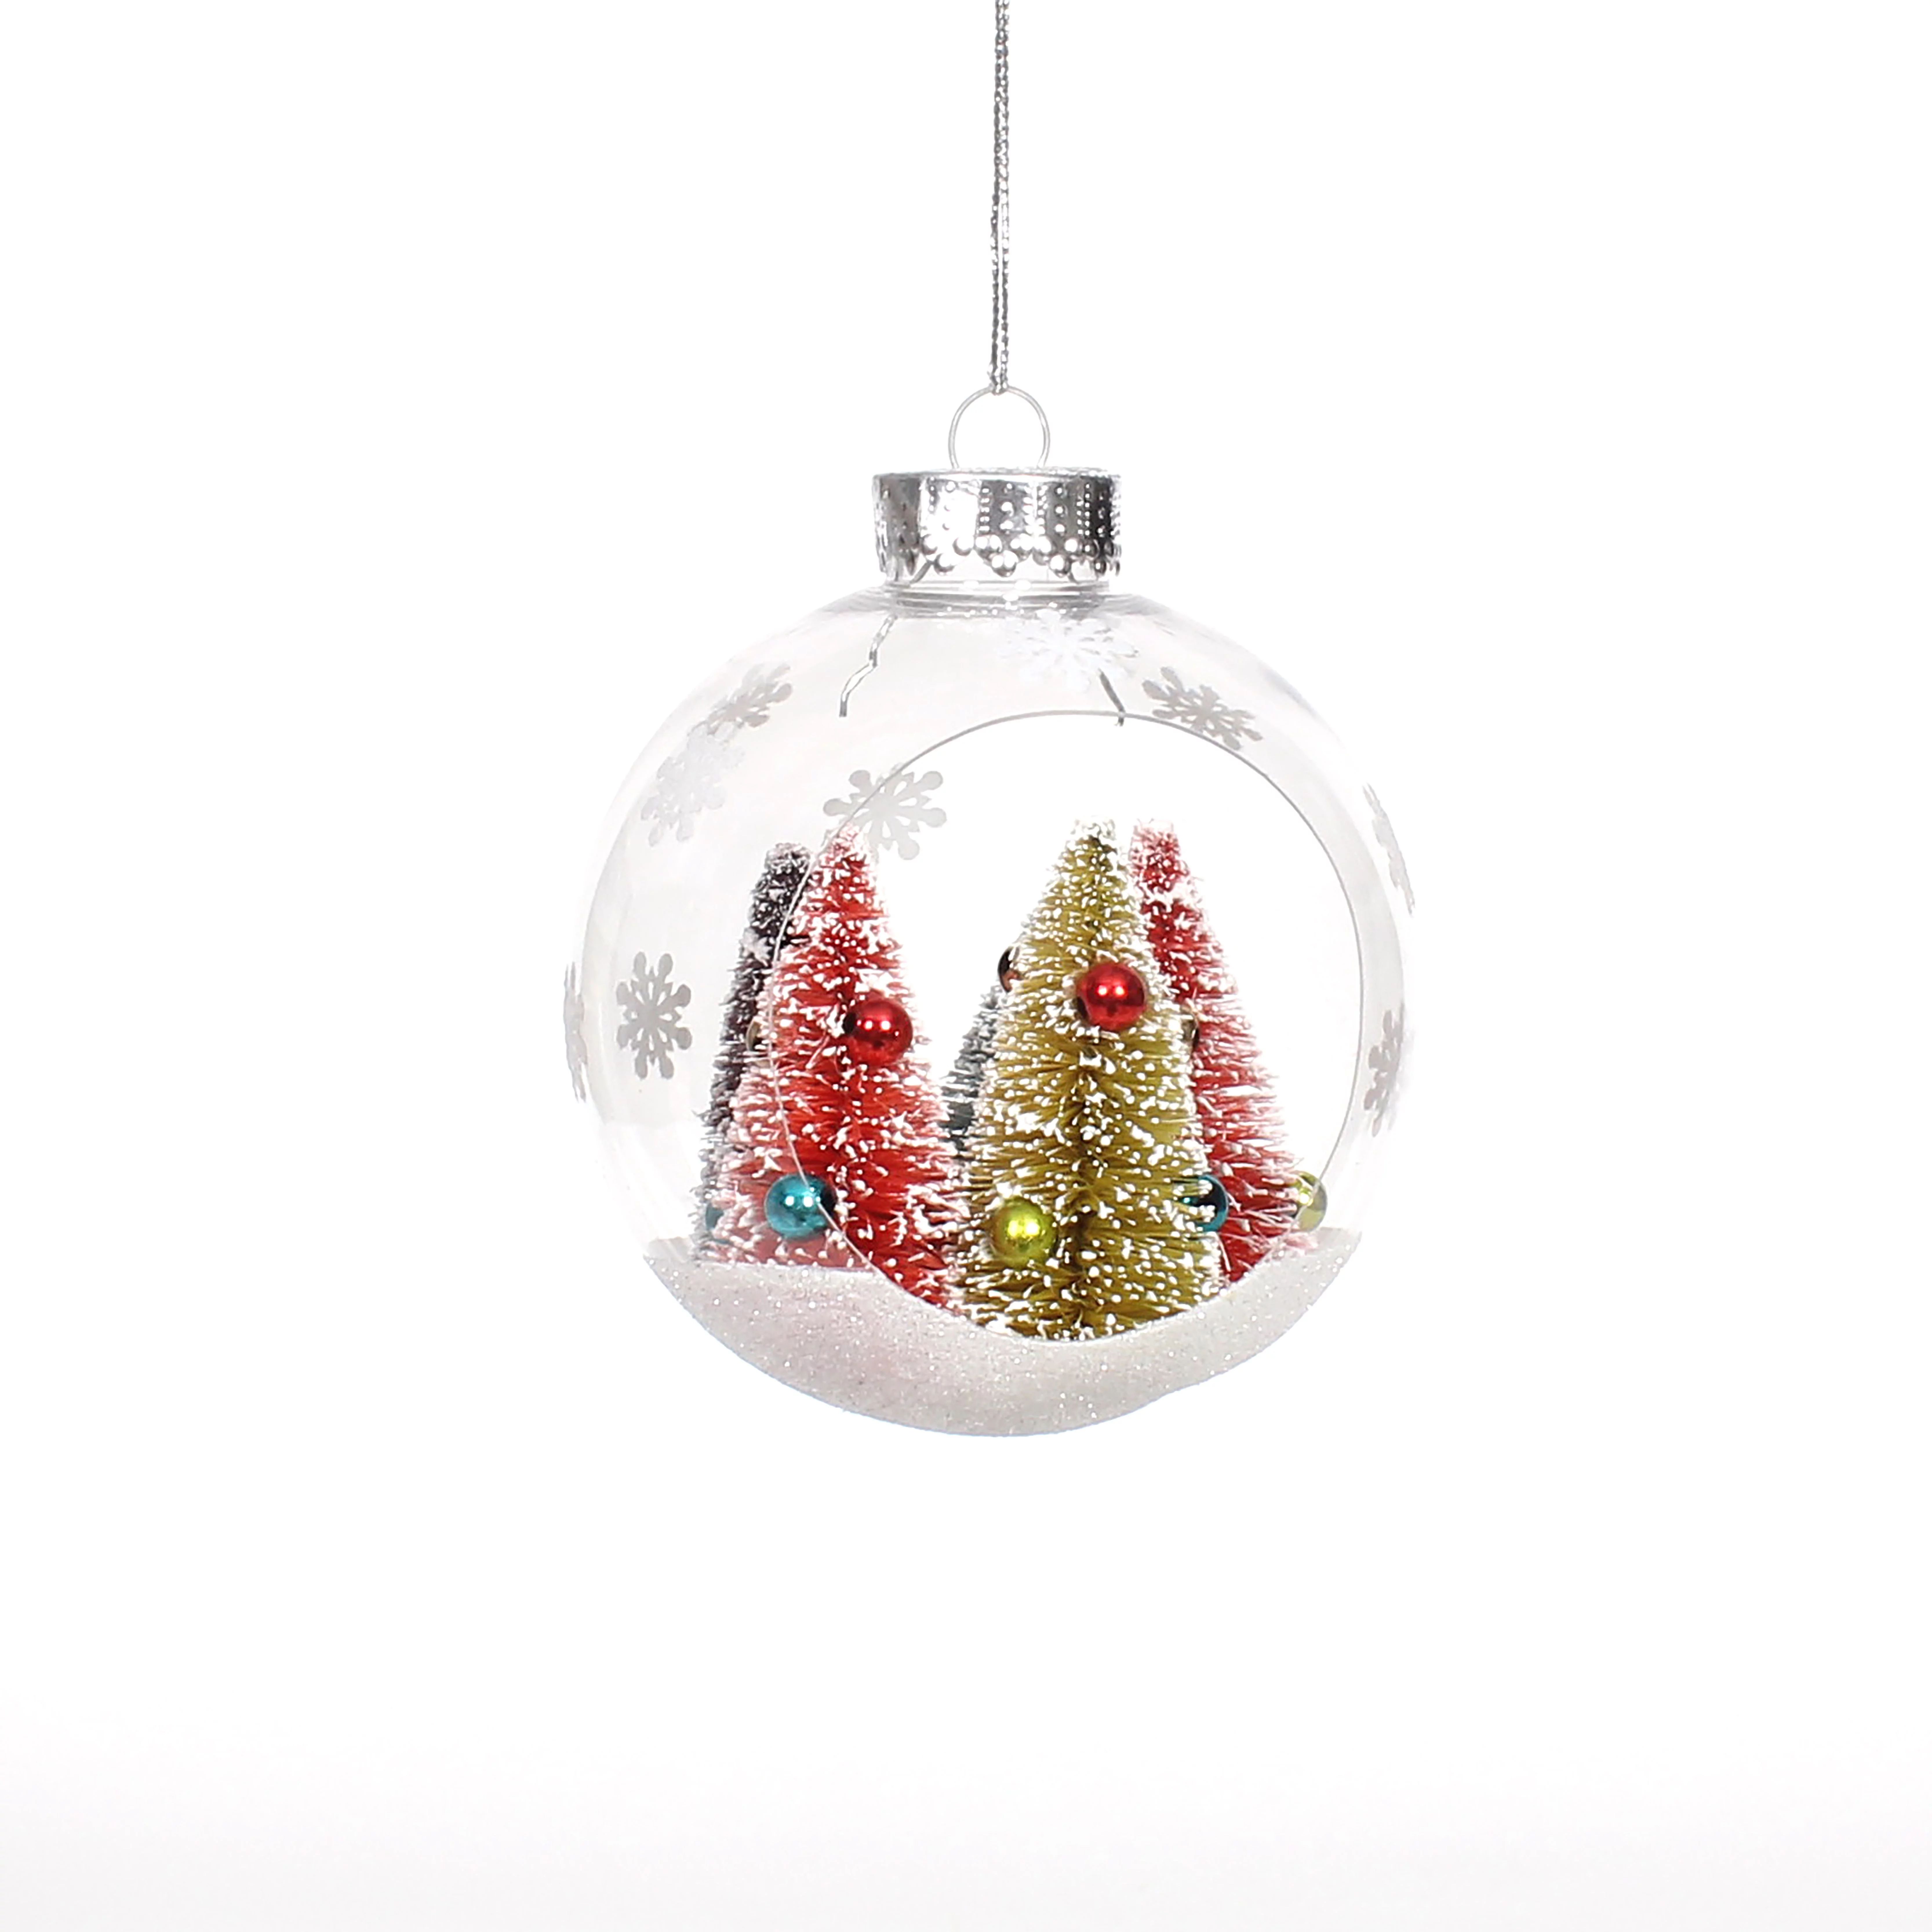 Holiday Time Clear Plastic Ball With Trees Inside Christmas Ornament | Walmart (US)